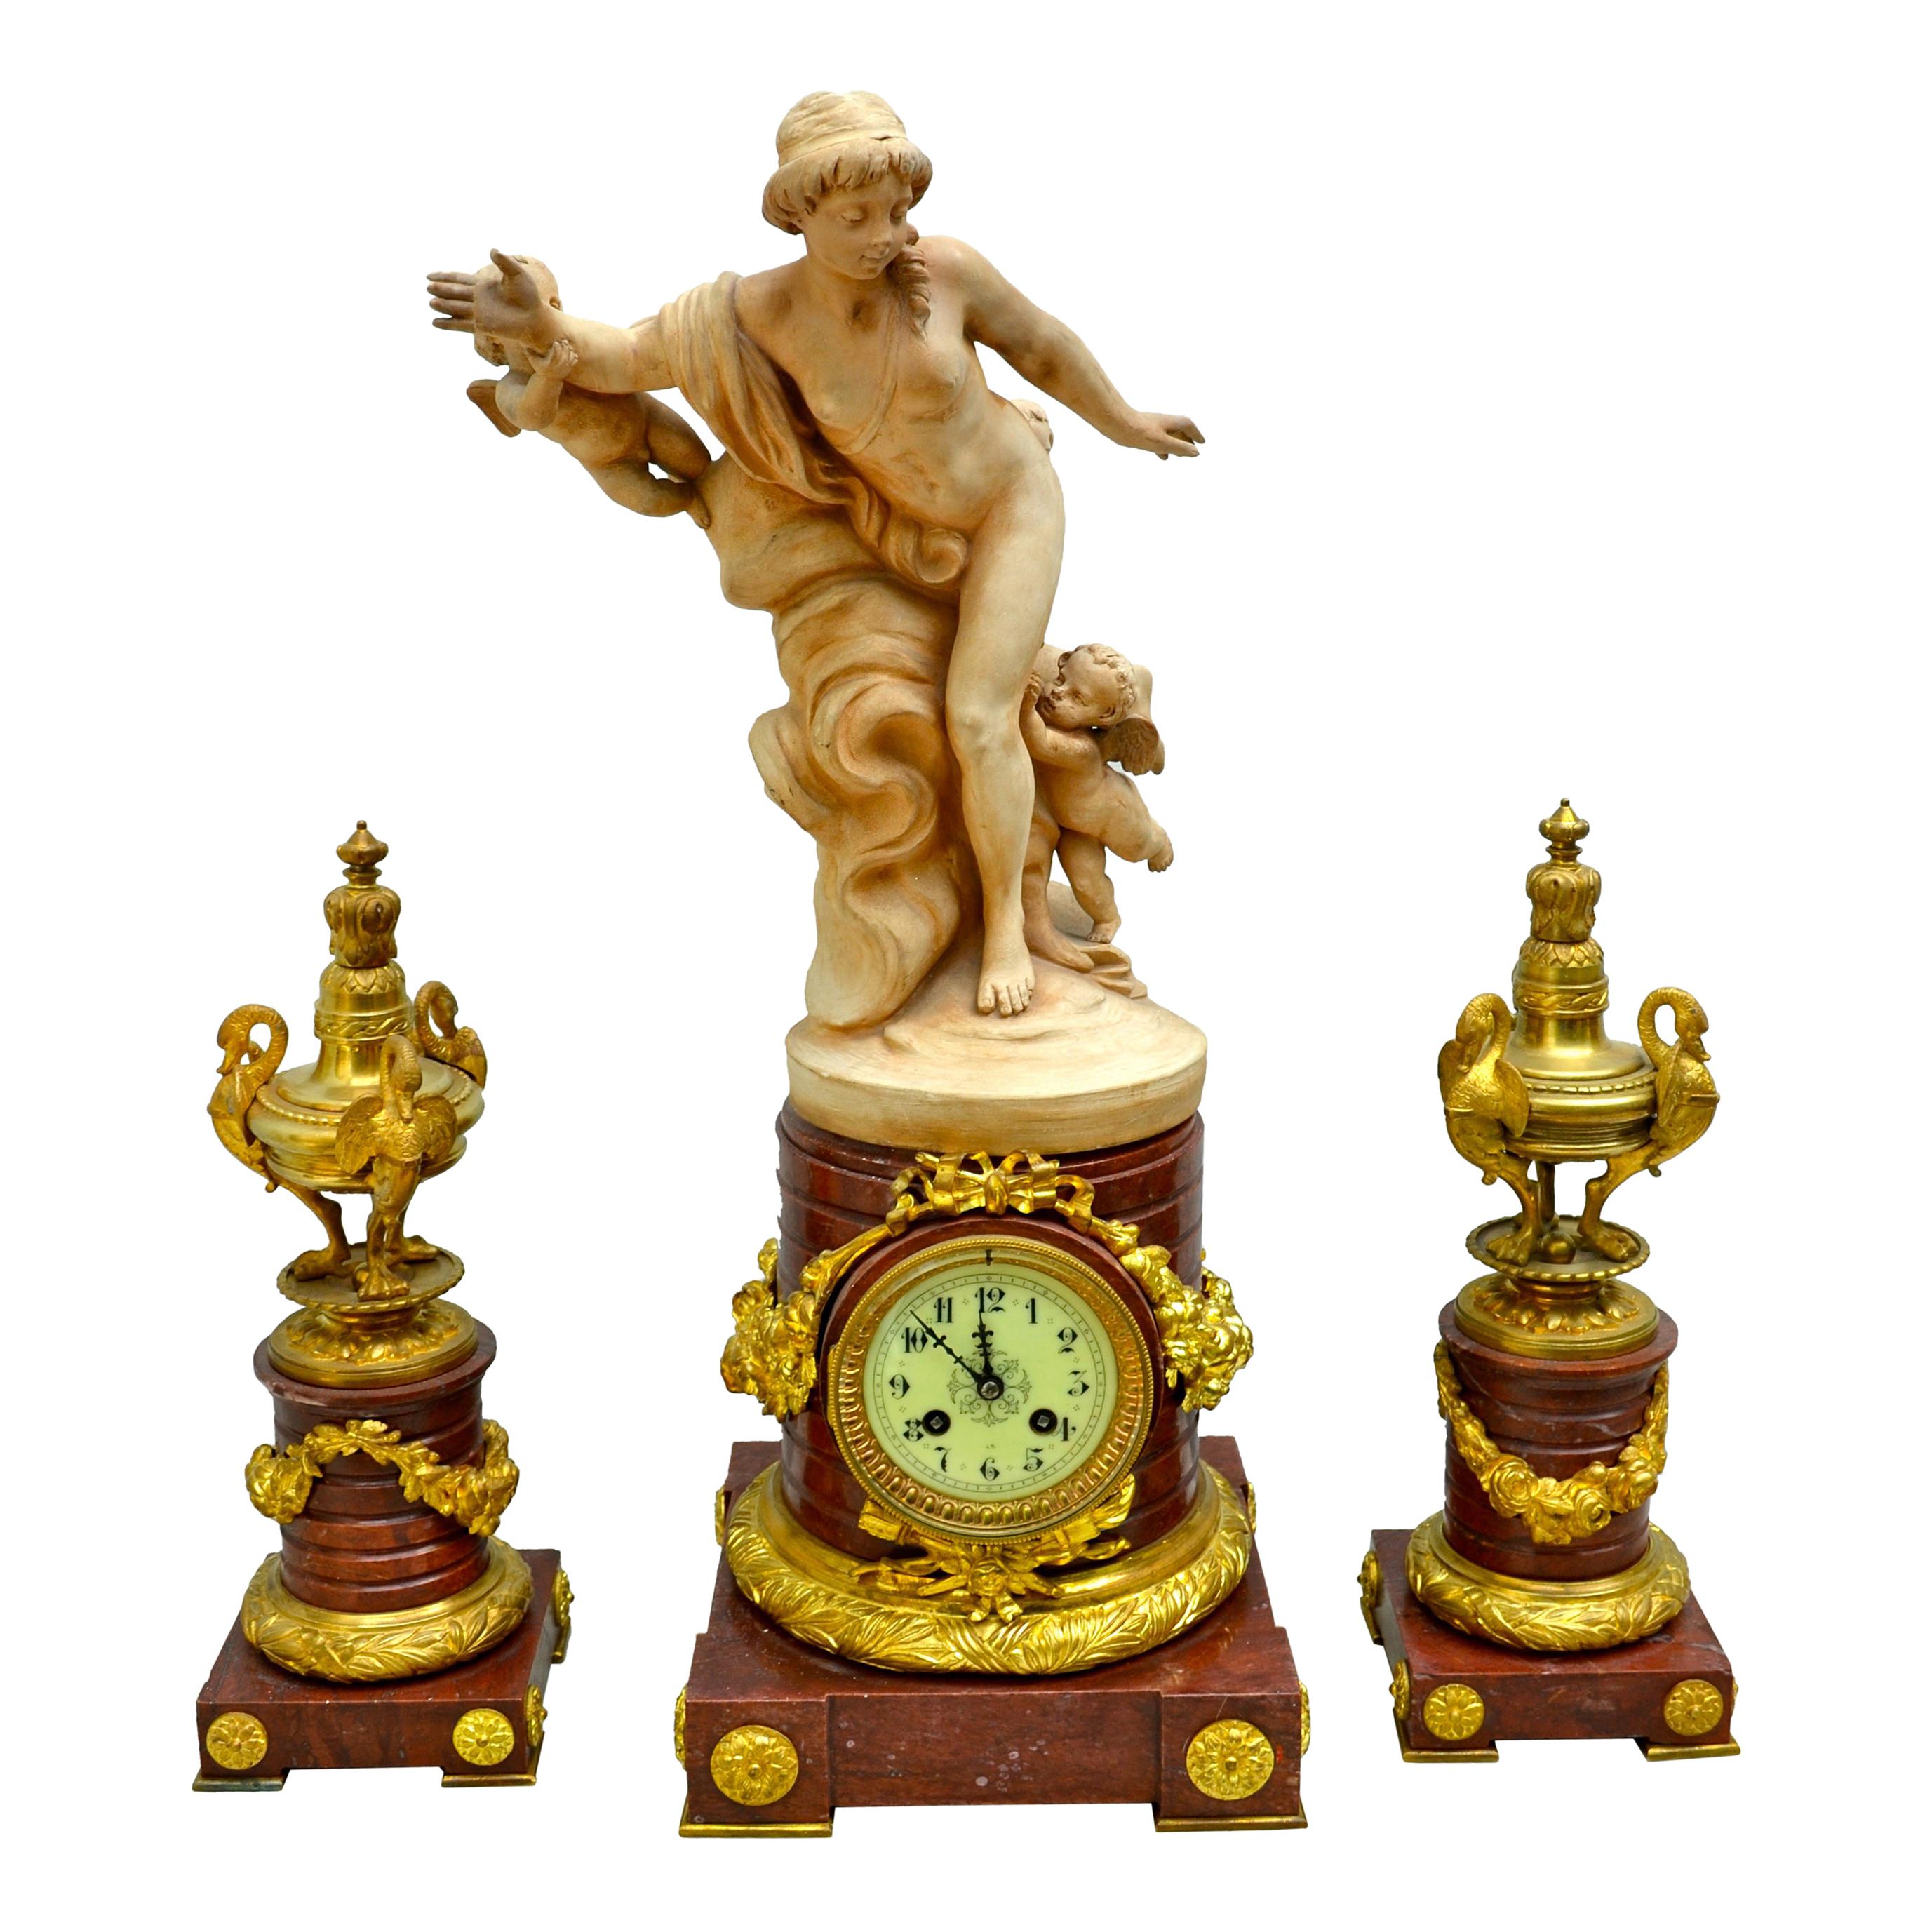 Griotte Marble and Gilt Bronze Clock Garniture with a Terracotta Nymph Statue